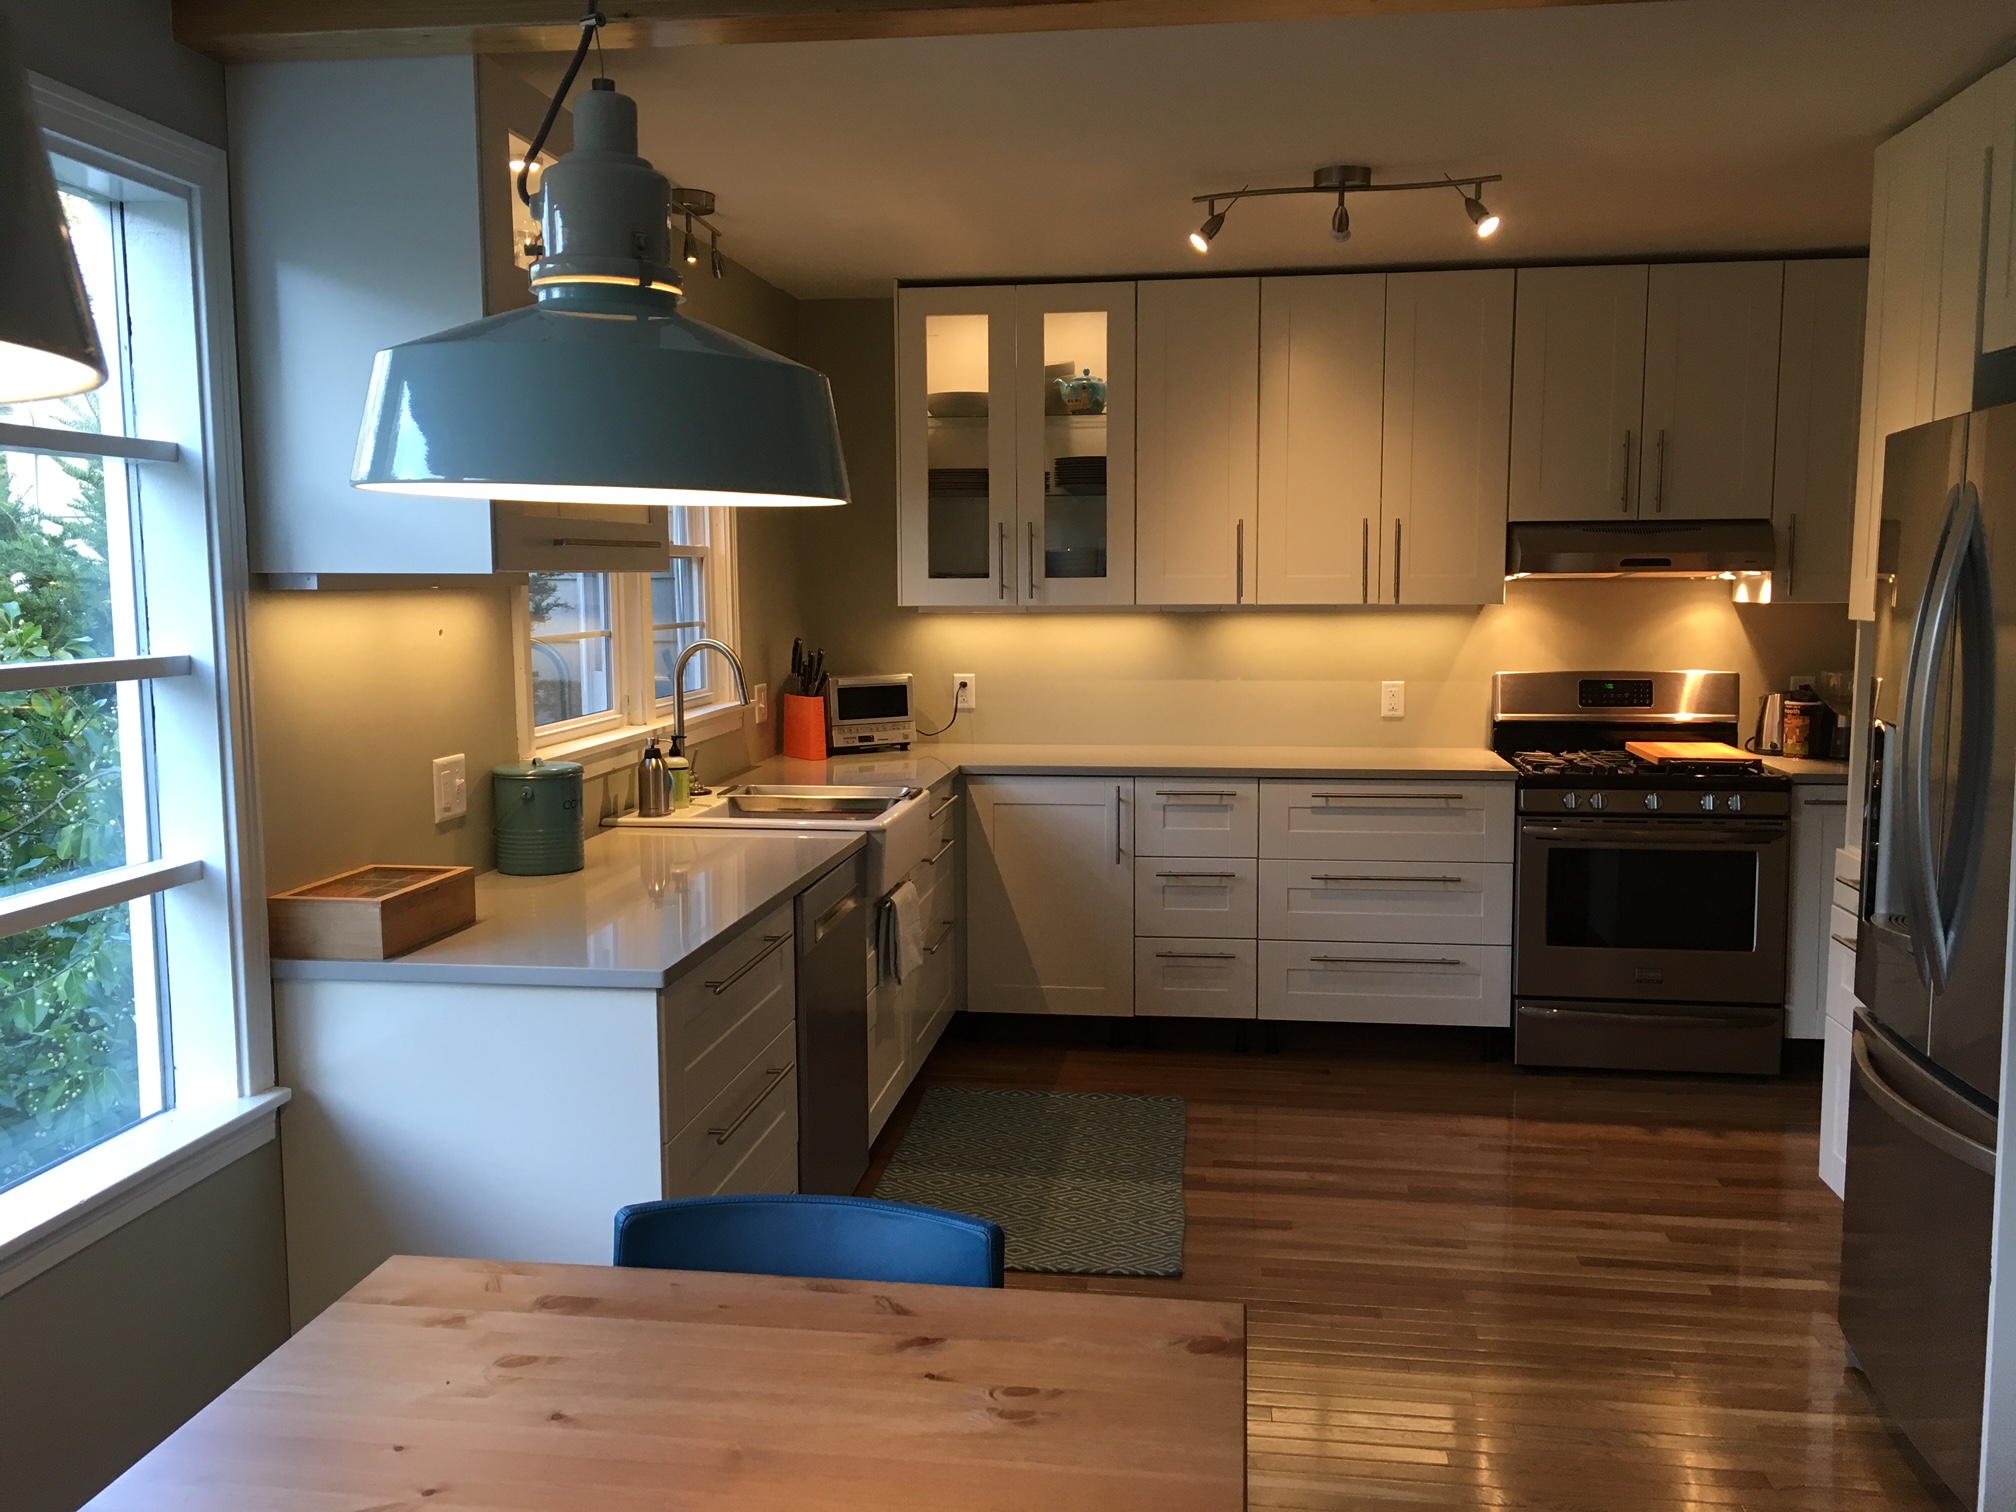 A Gorgeous IKEA Kitchen Renovation in Upstate New York